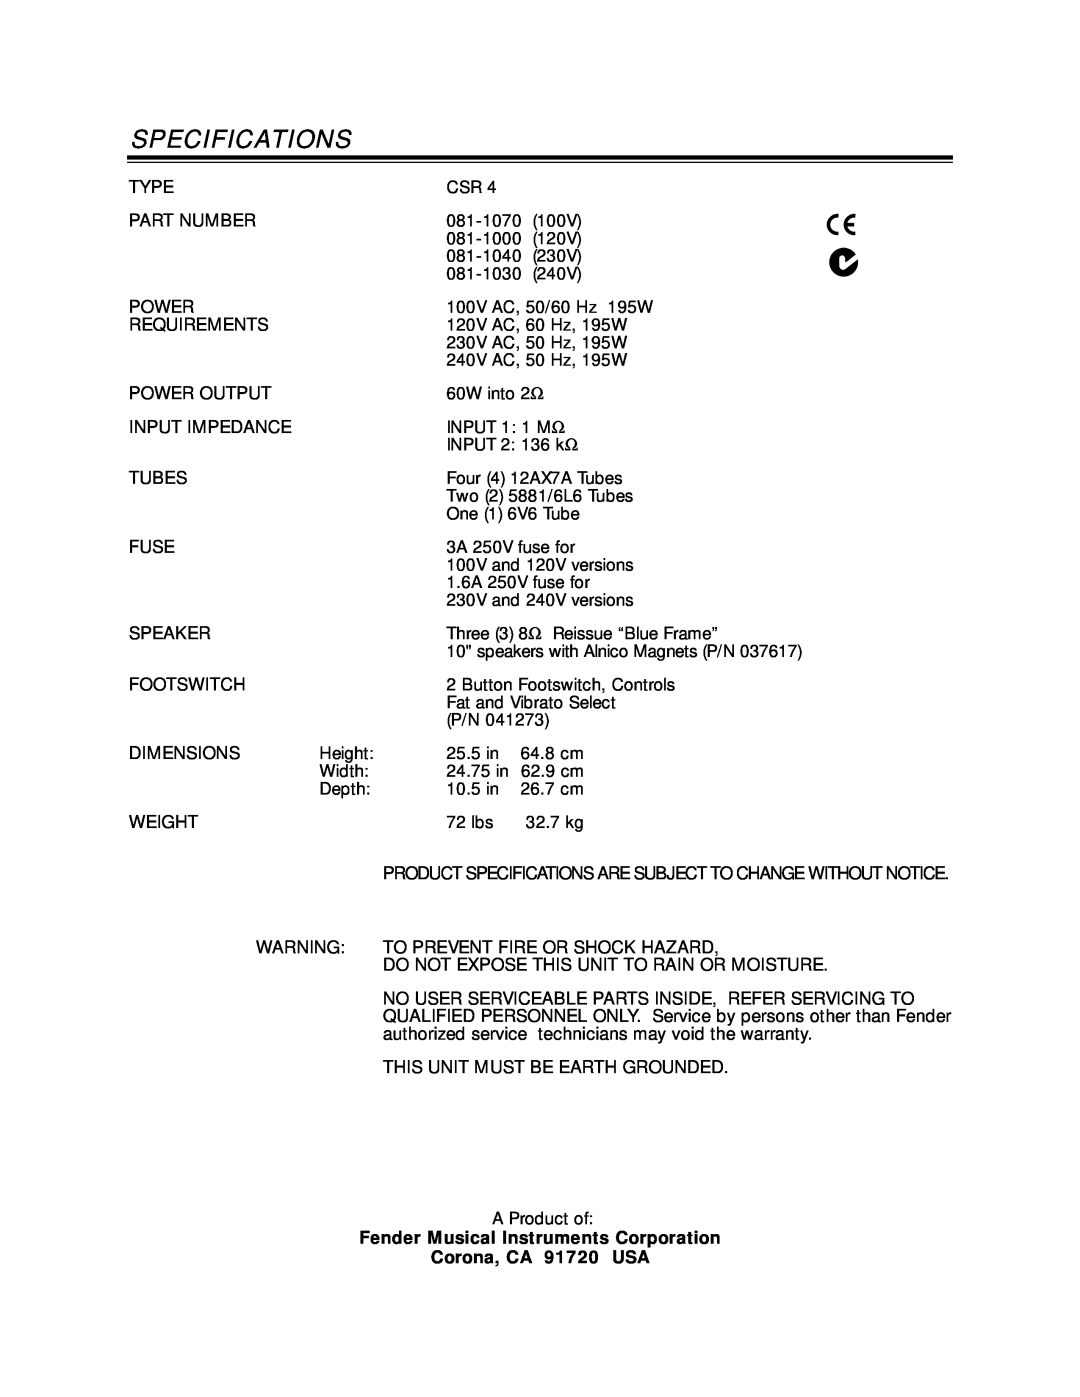 Fender P/N 053493 manual Specifications, Fender Musical Instruments Corporation, Corona, CA 91720 USA 